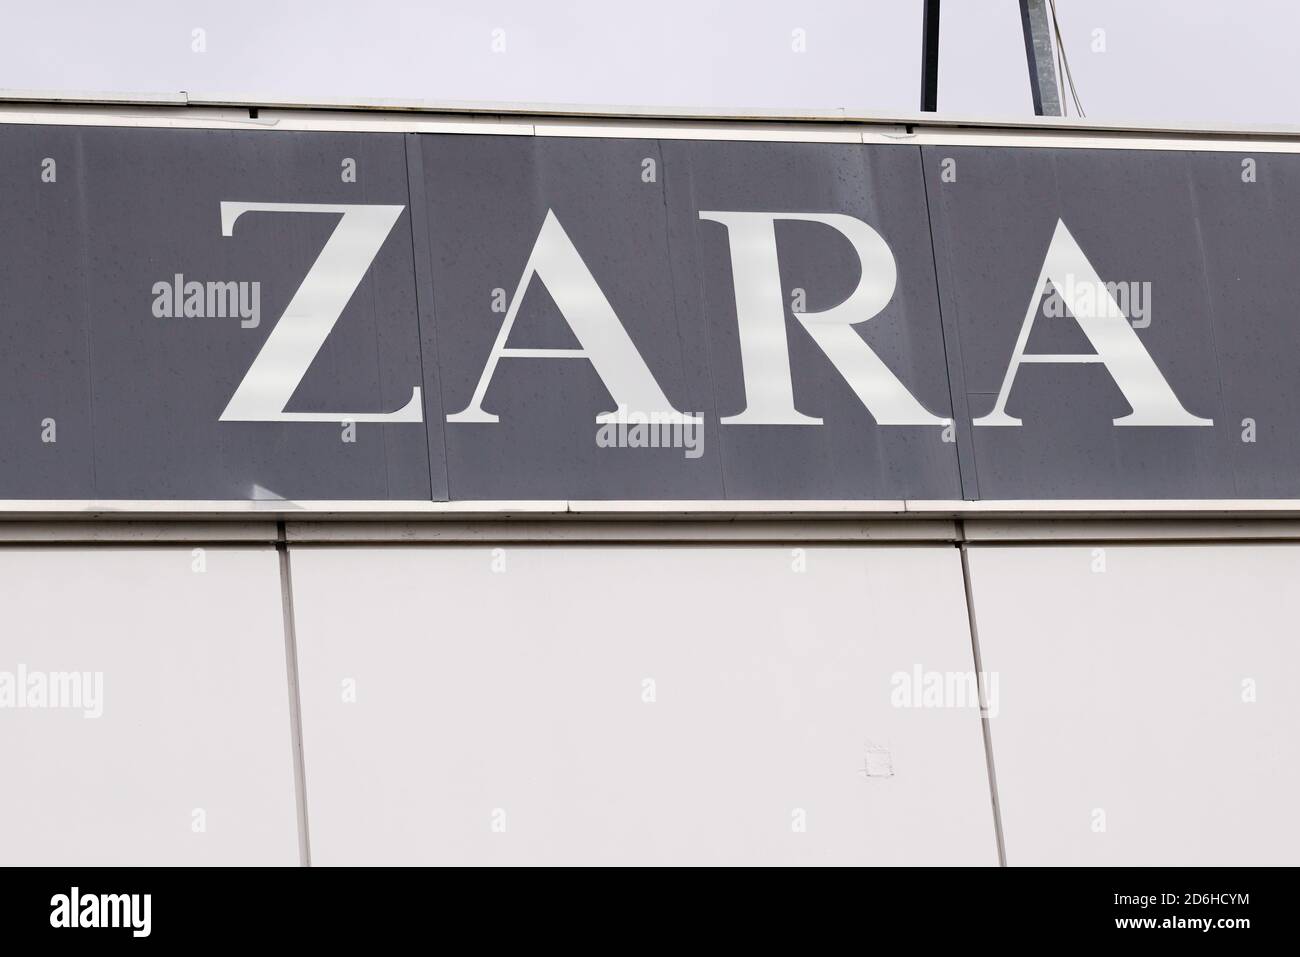 Bordeaux , Aquitaine / France - 10 10 2020 : zara logo and text sign of  spanish retail fashion store brand clothing shop Stock Photo - Alamy